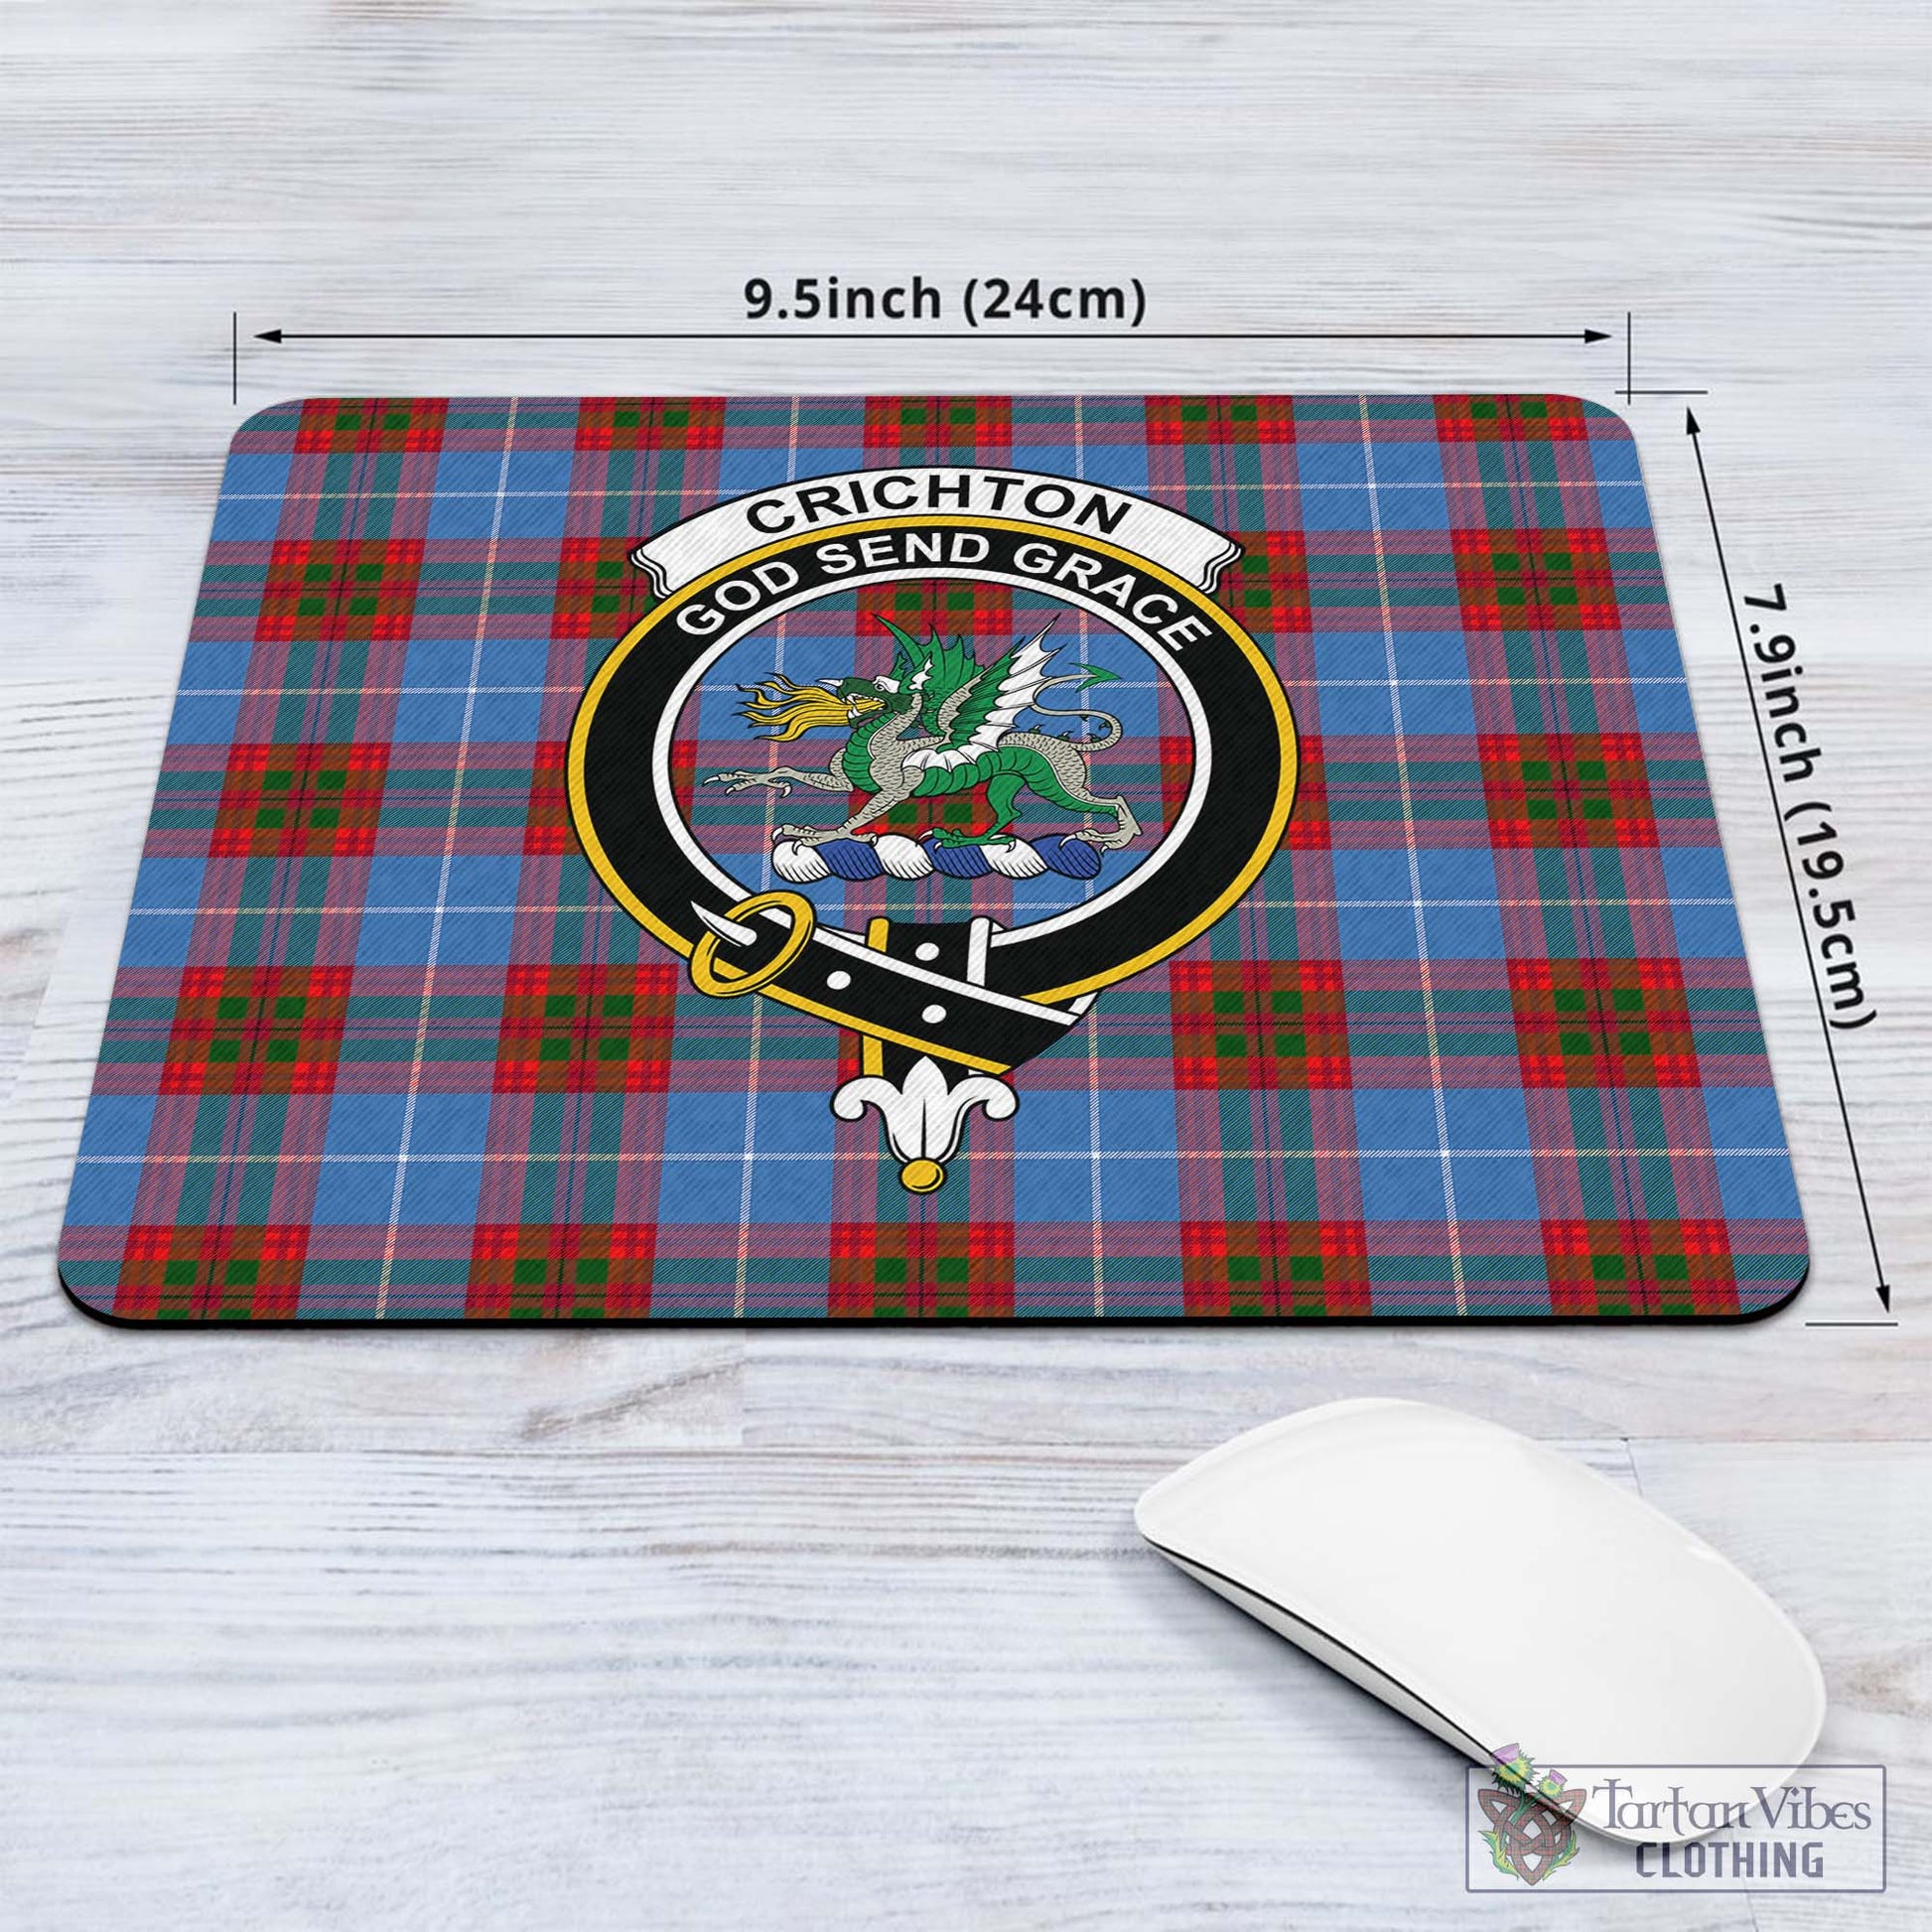 Tartan Vibes Clothing Crichton Tartan Mouse Pad with Family Crest